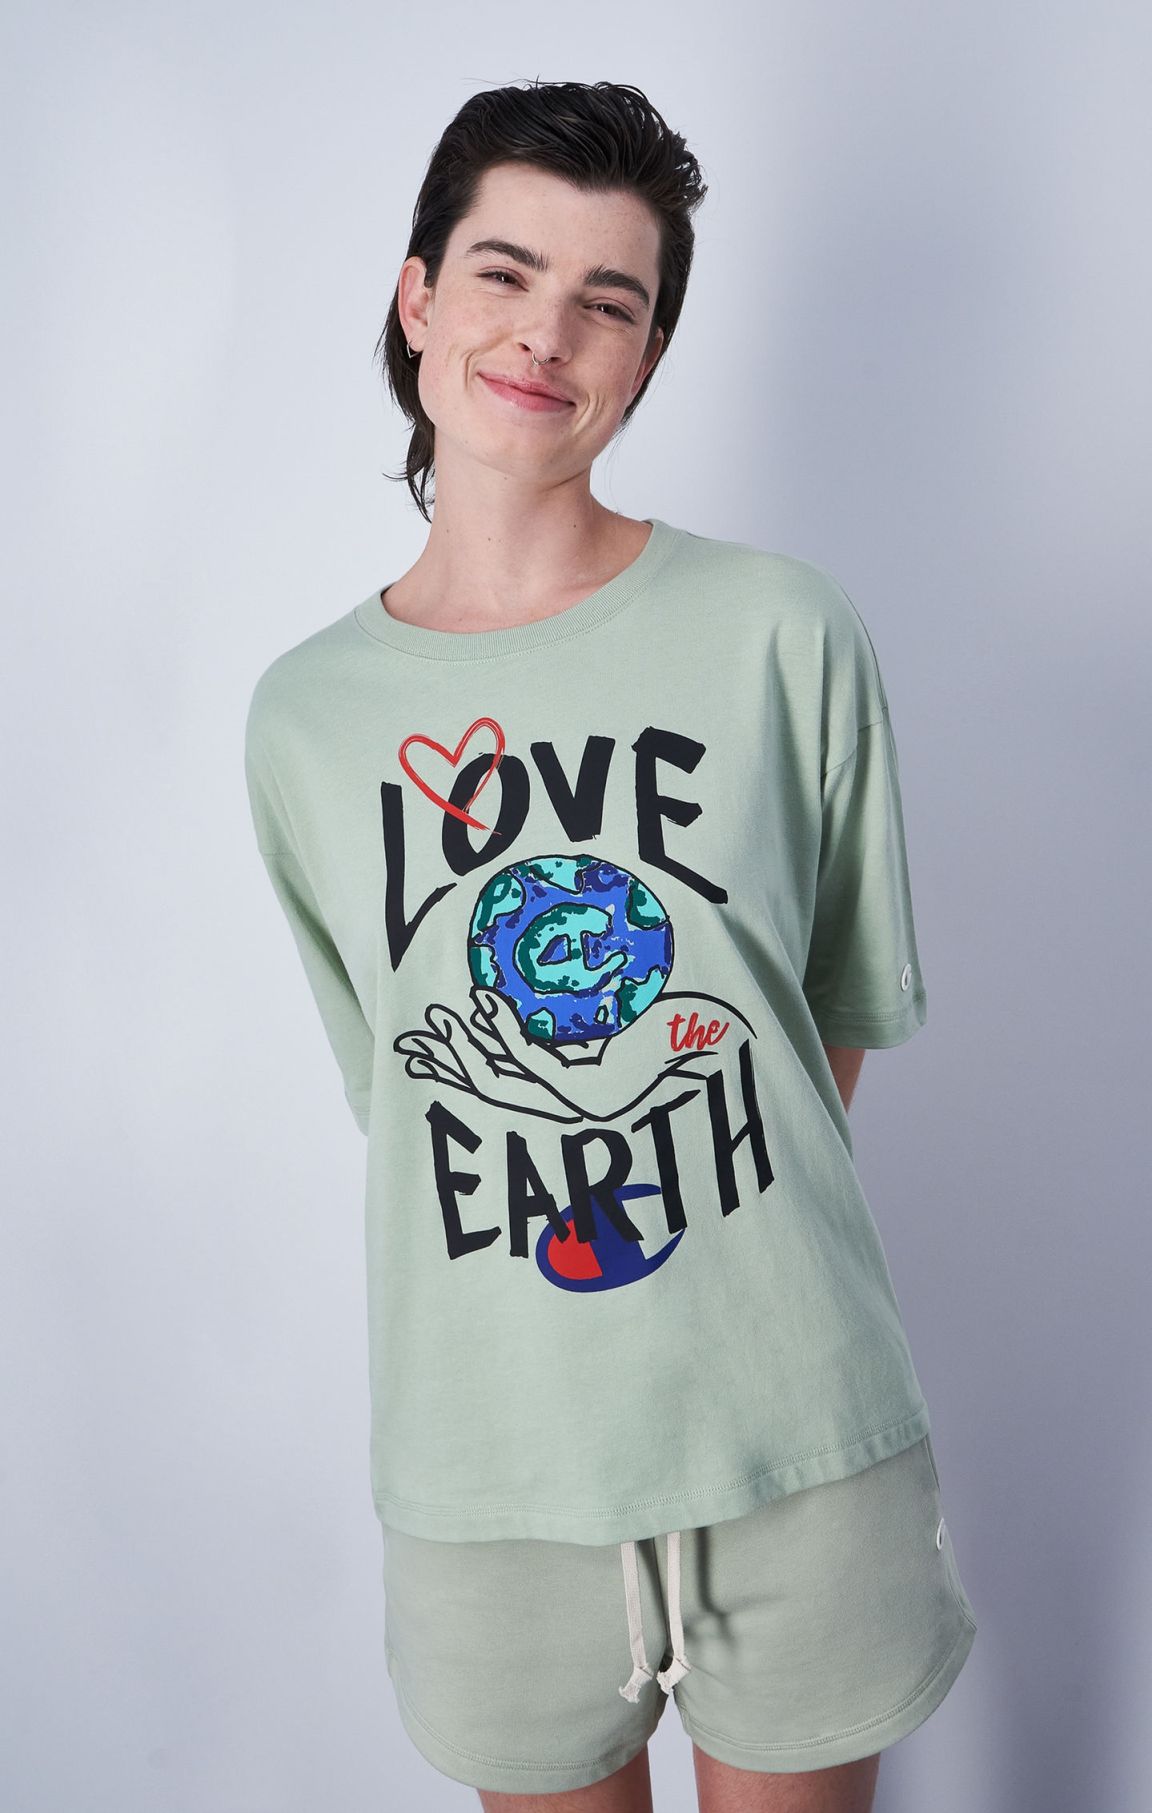 Camiseta ecológica relaxed fit